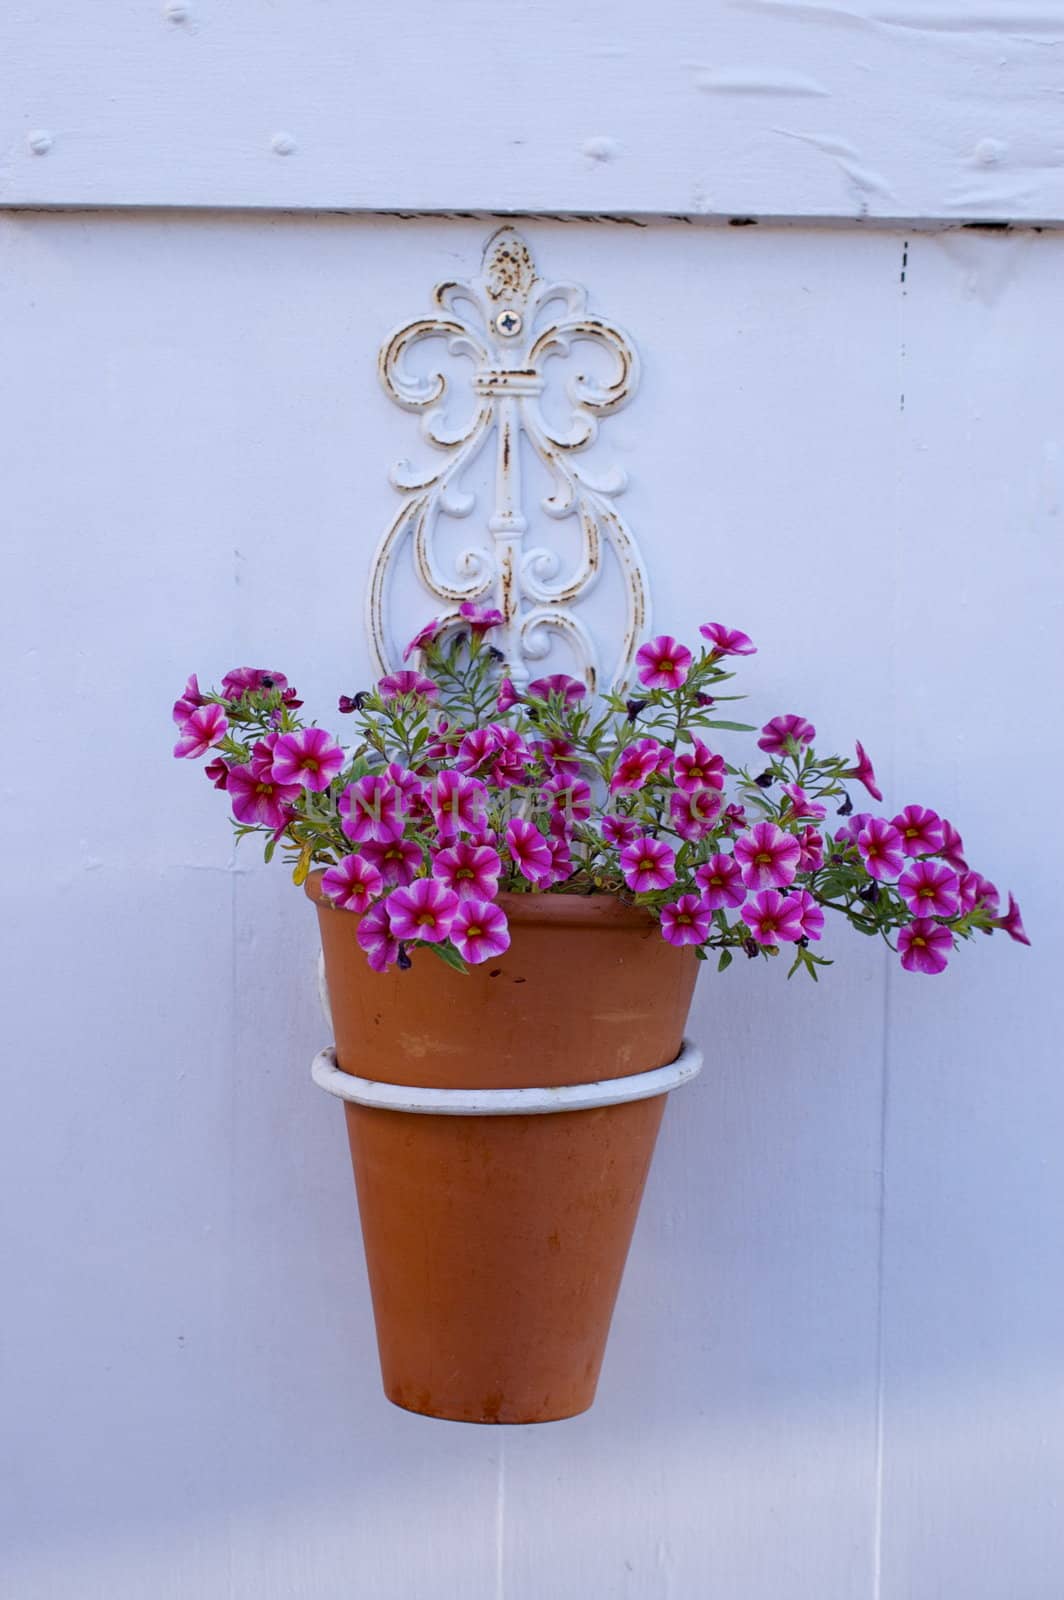 Pink Flowers In Pot Against White by PrincessToula